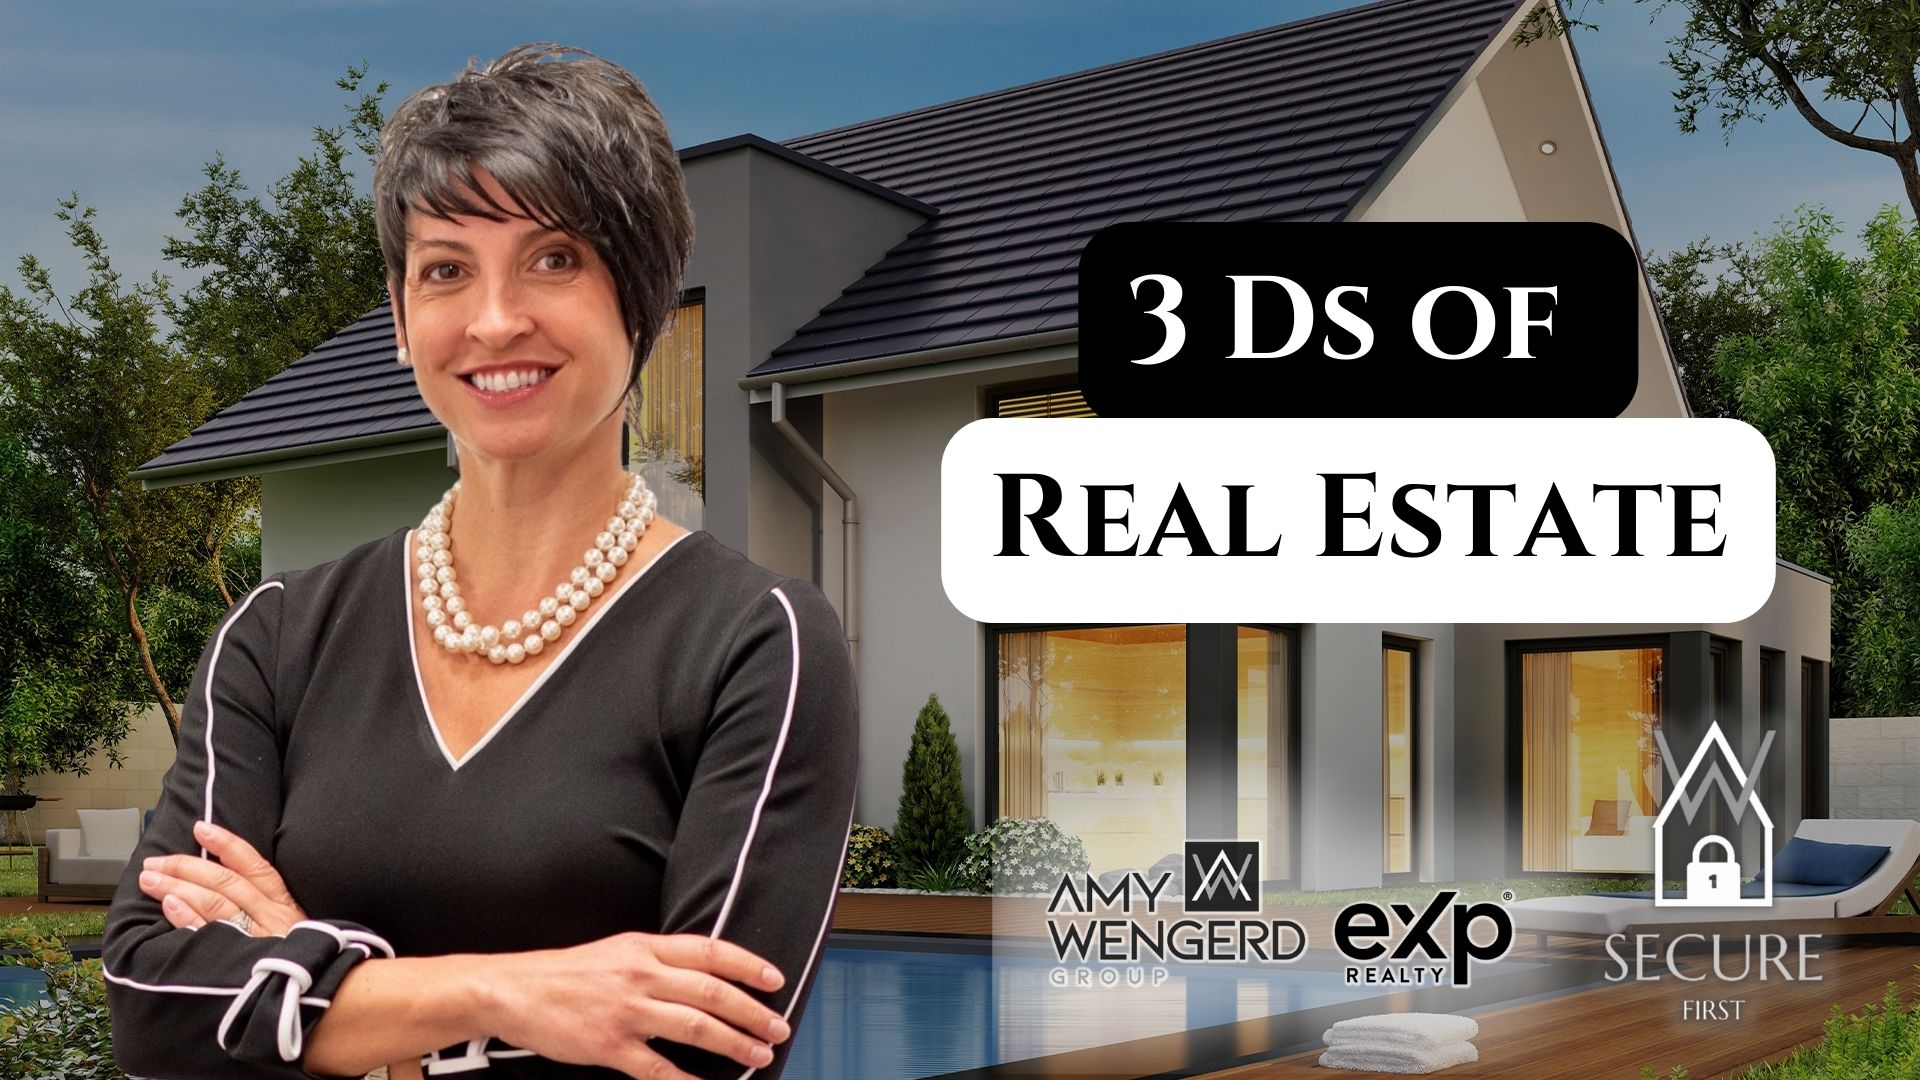 Real Estate’s Year-Round Trends: The 3 D's